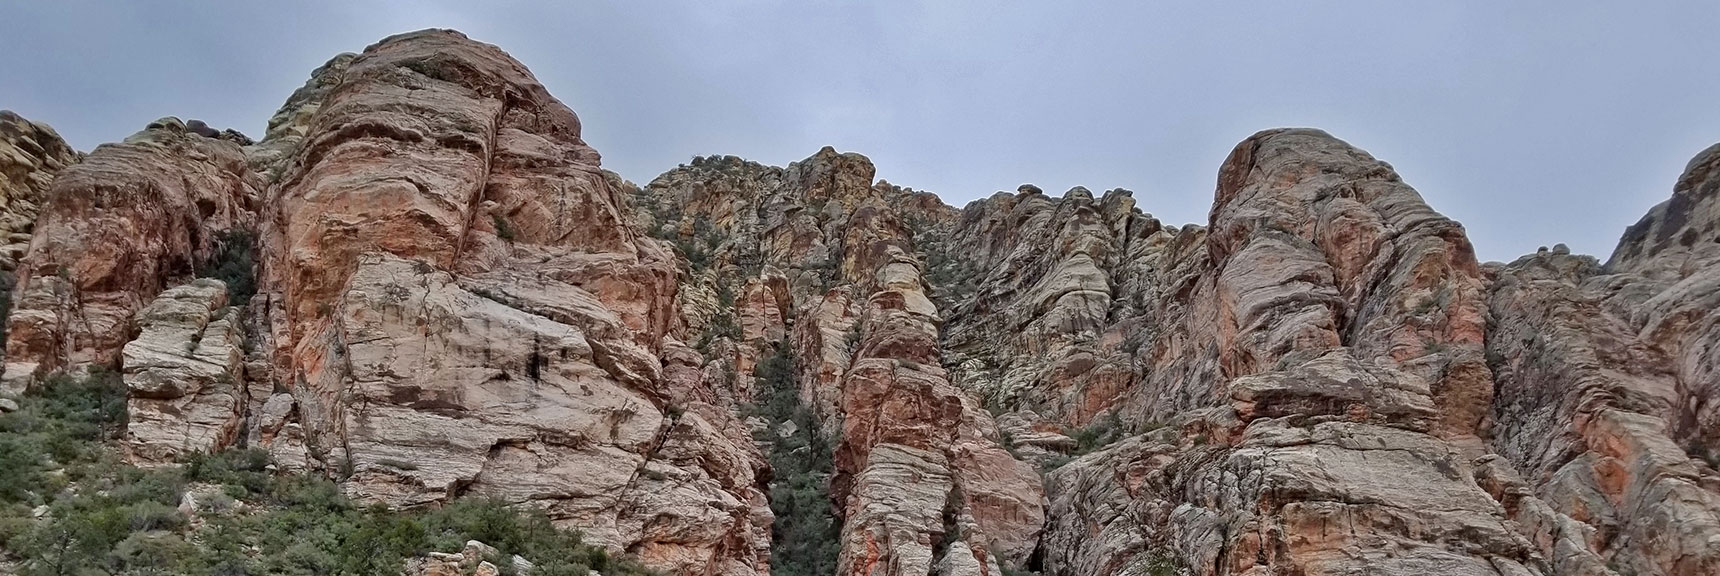 Rugged Area of White Rock Mountain from White Rock Mountain Loop in Red Rock Park, Nevada